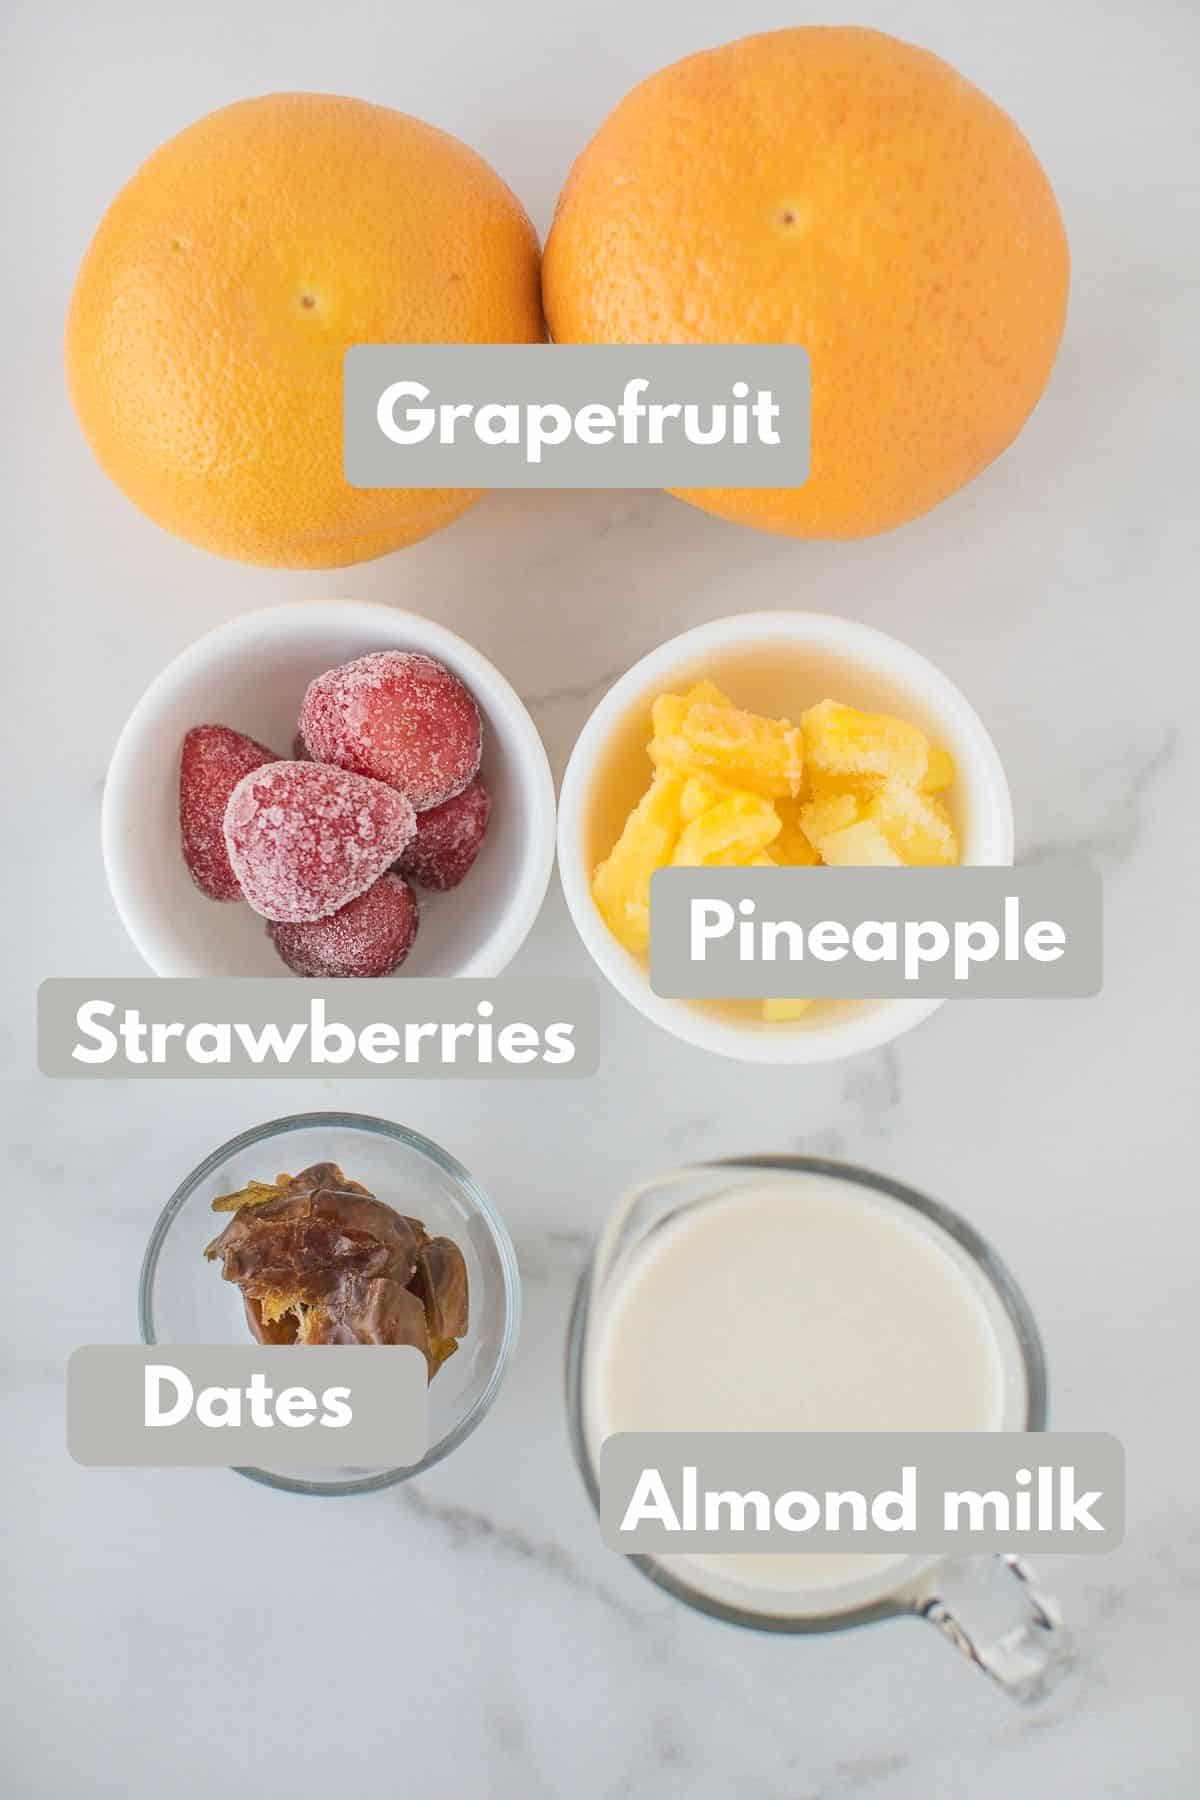 image of ingredients for grapefruit smoothie with labels.